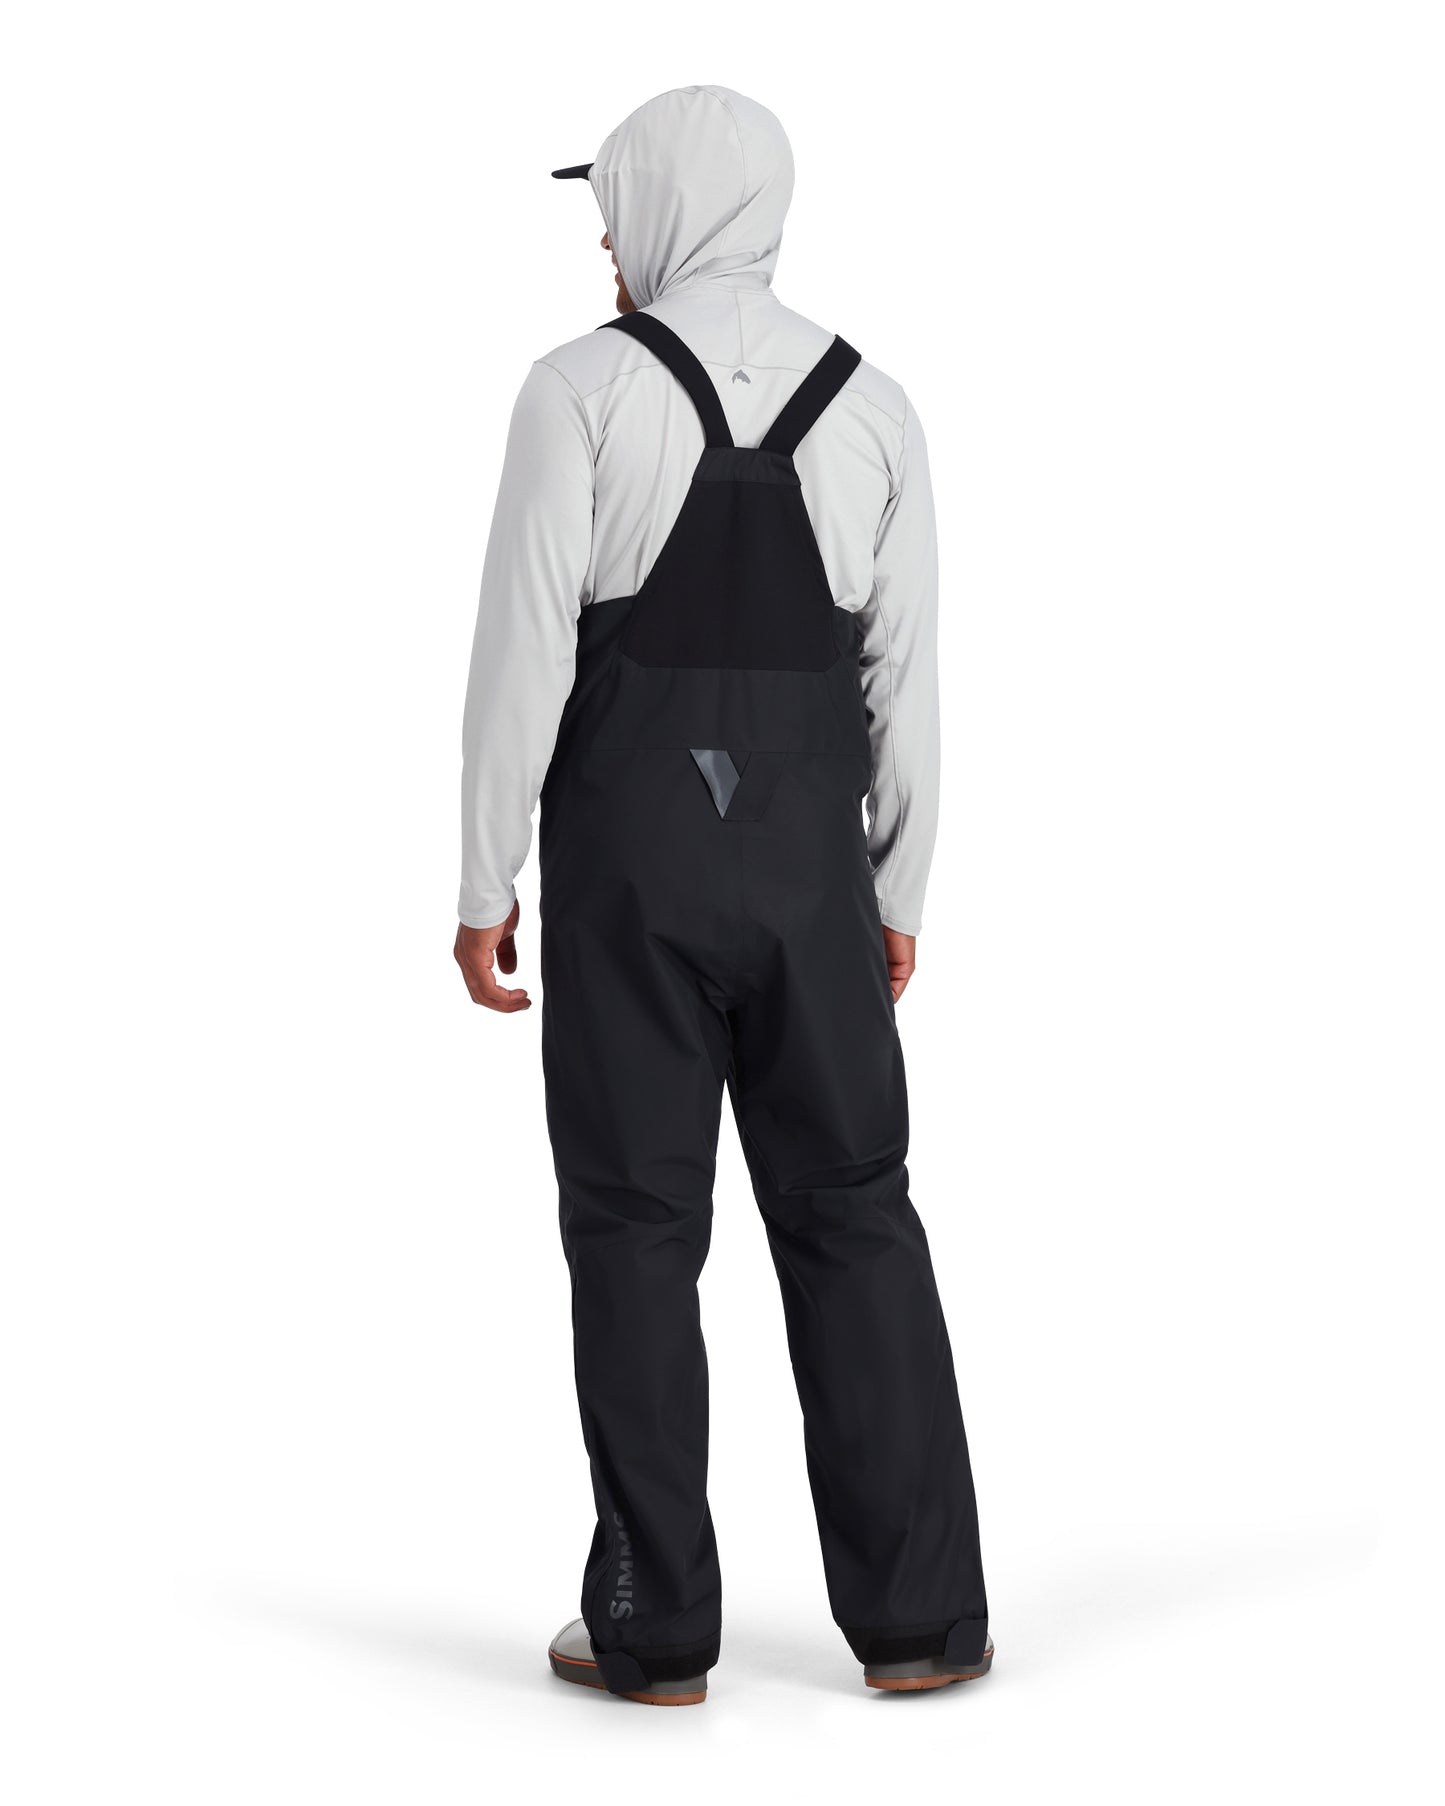 Simms Challenger Insulated Bib Black Size: XL – Glasgow Angling Centre